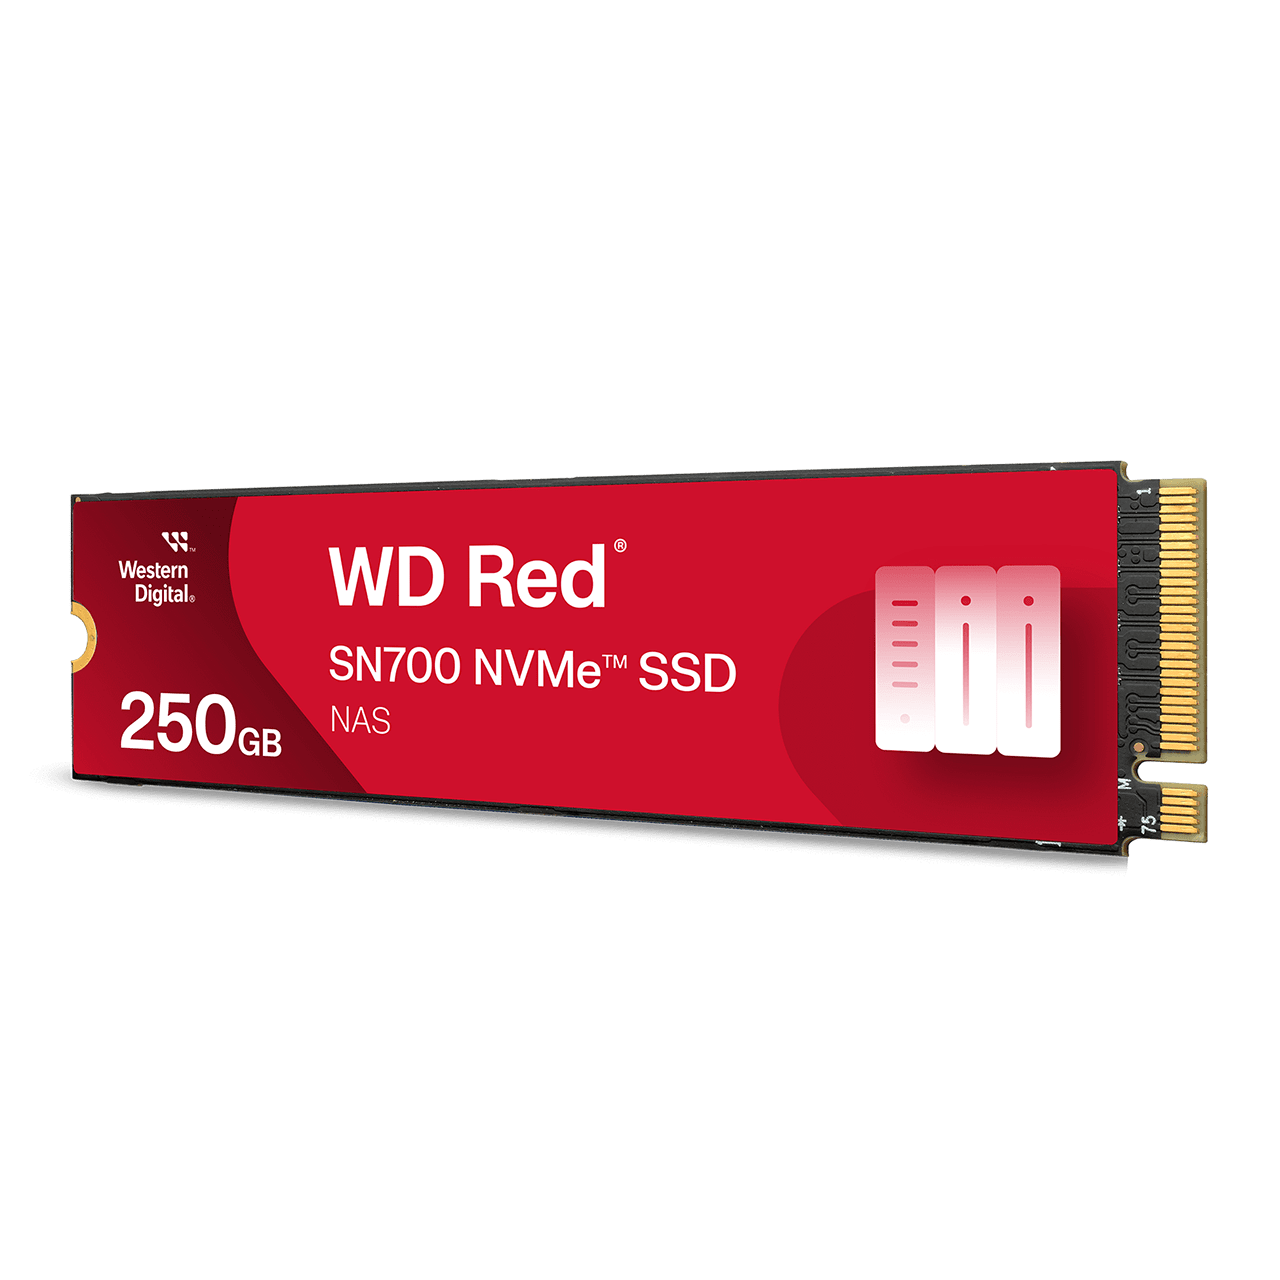 WD_BLACK SN770 NVMe SSD  Western Digital Product Support